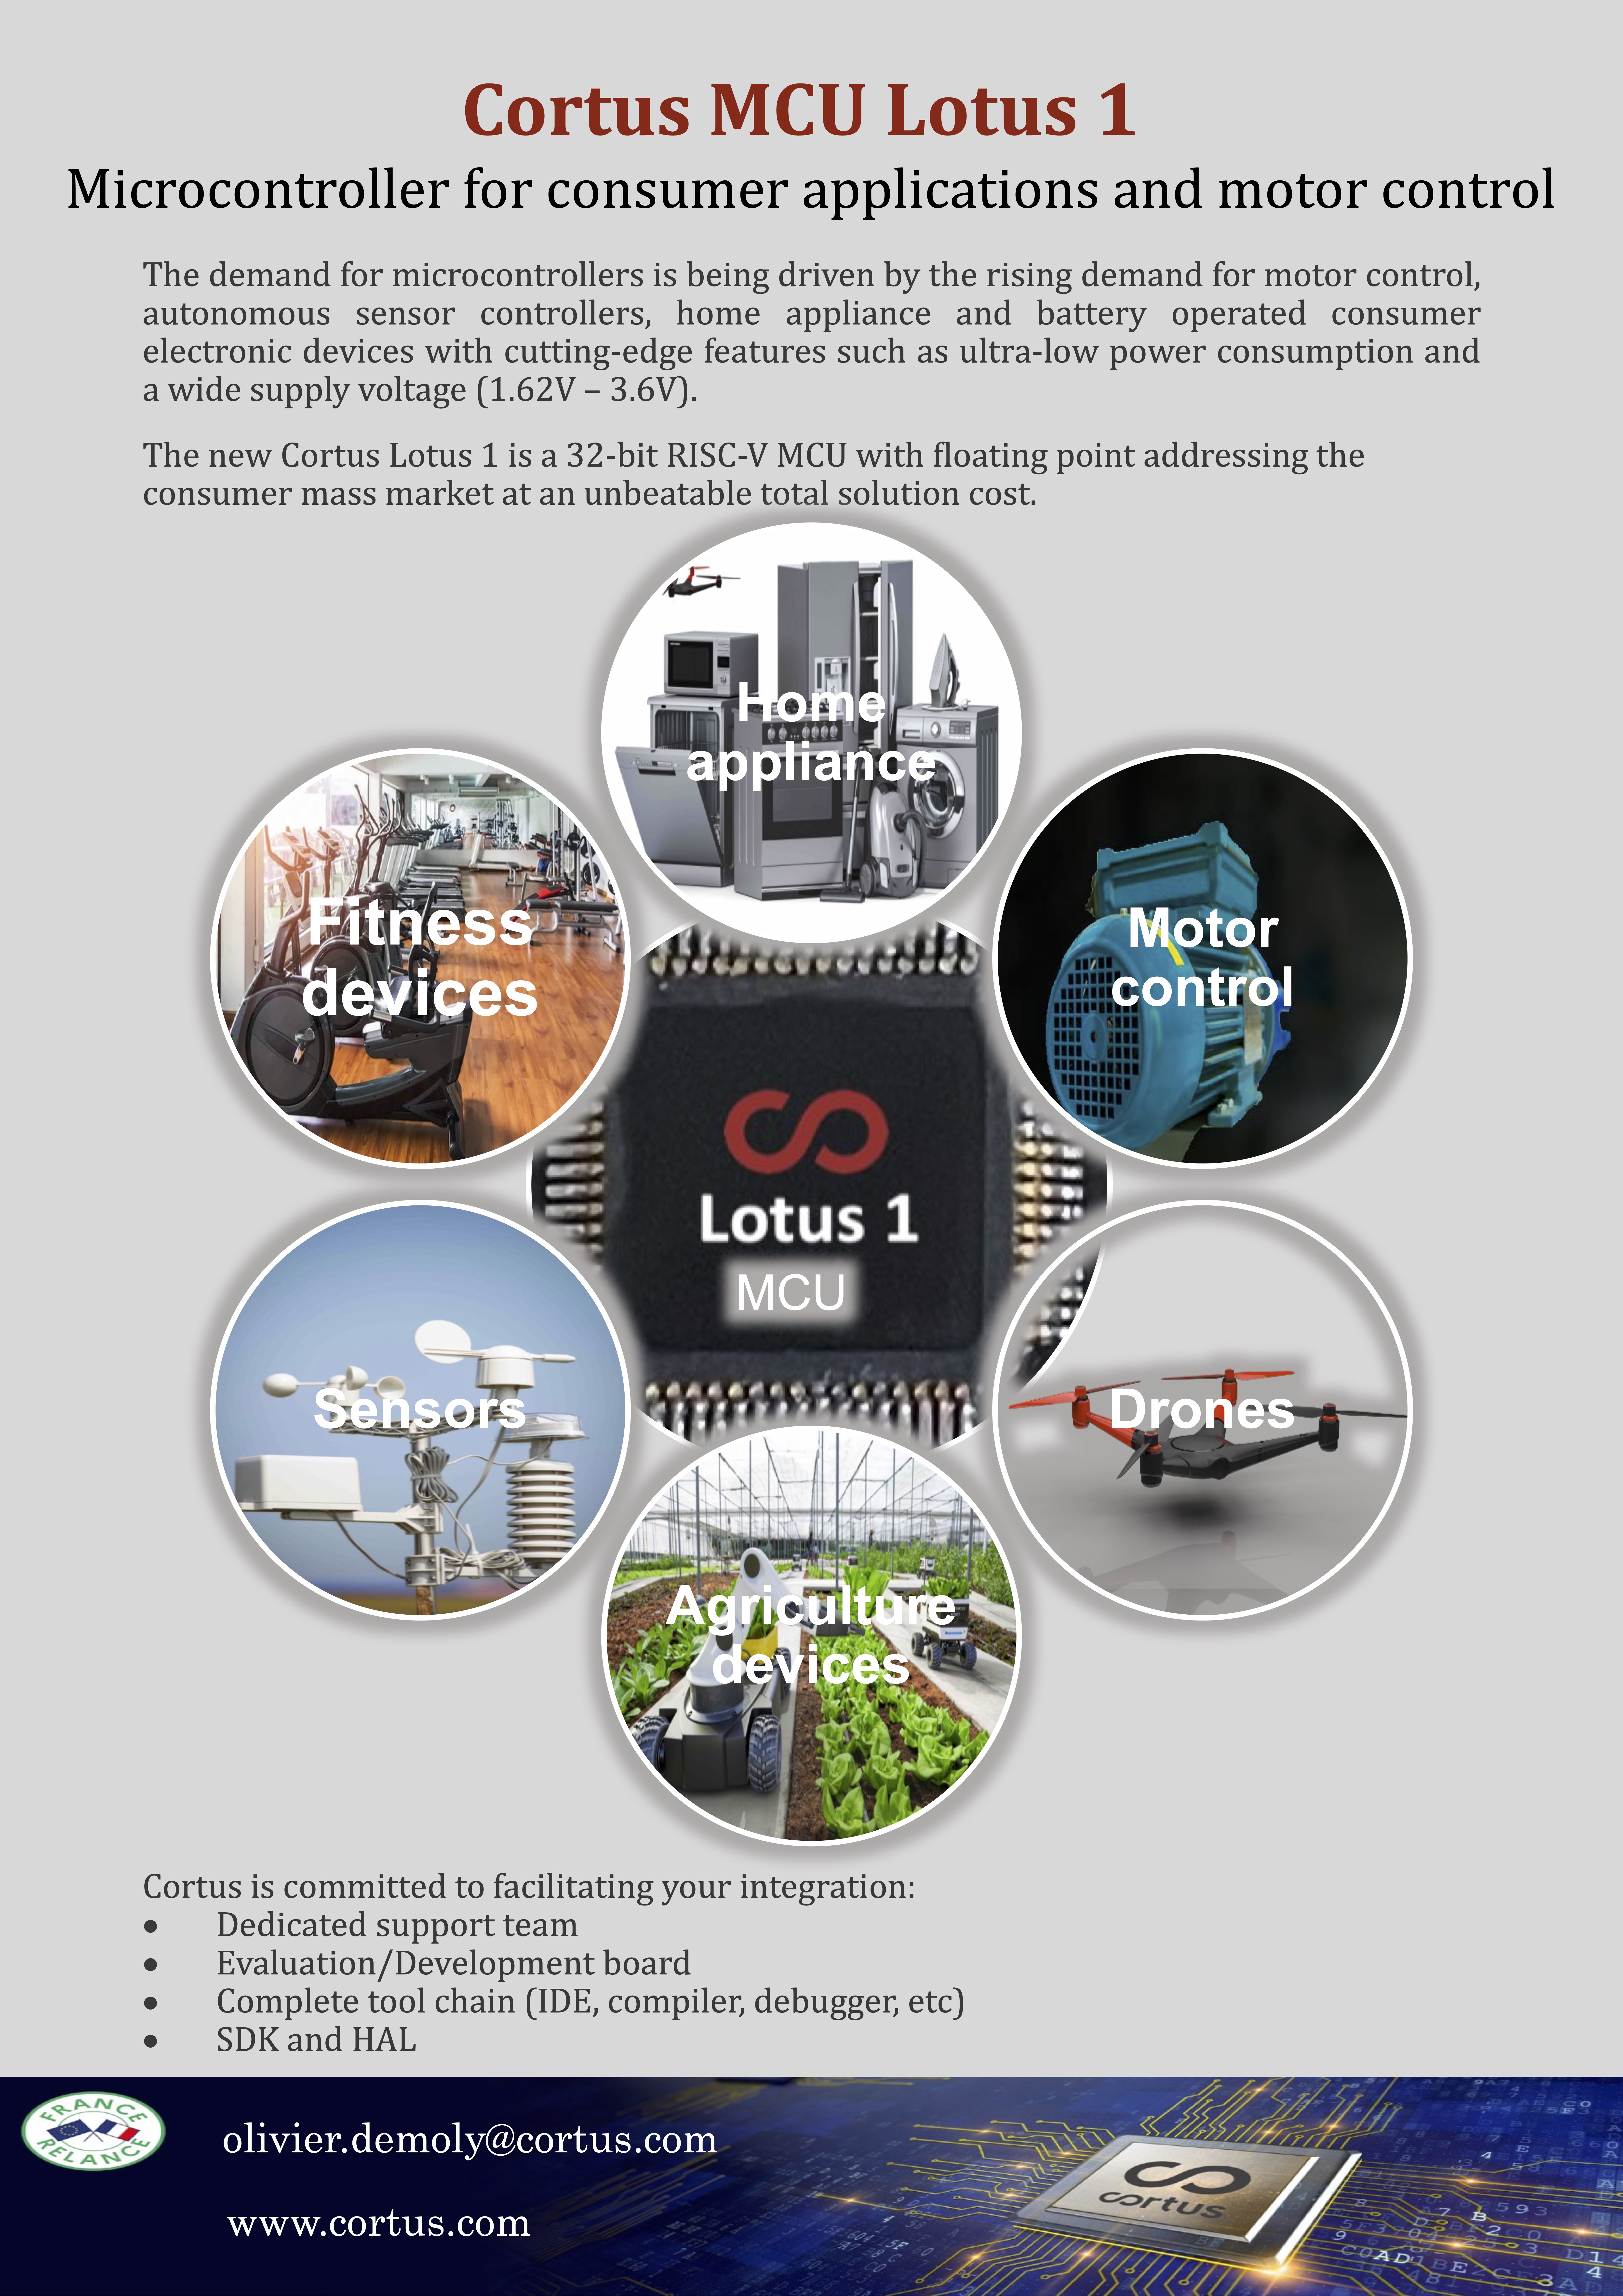 Cortus Lotus 1, is the 32-bit MCU solution developed by Cortus and addresses the strongest market segment